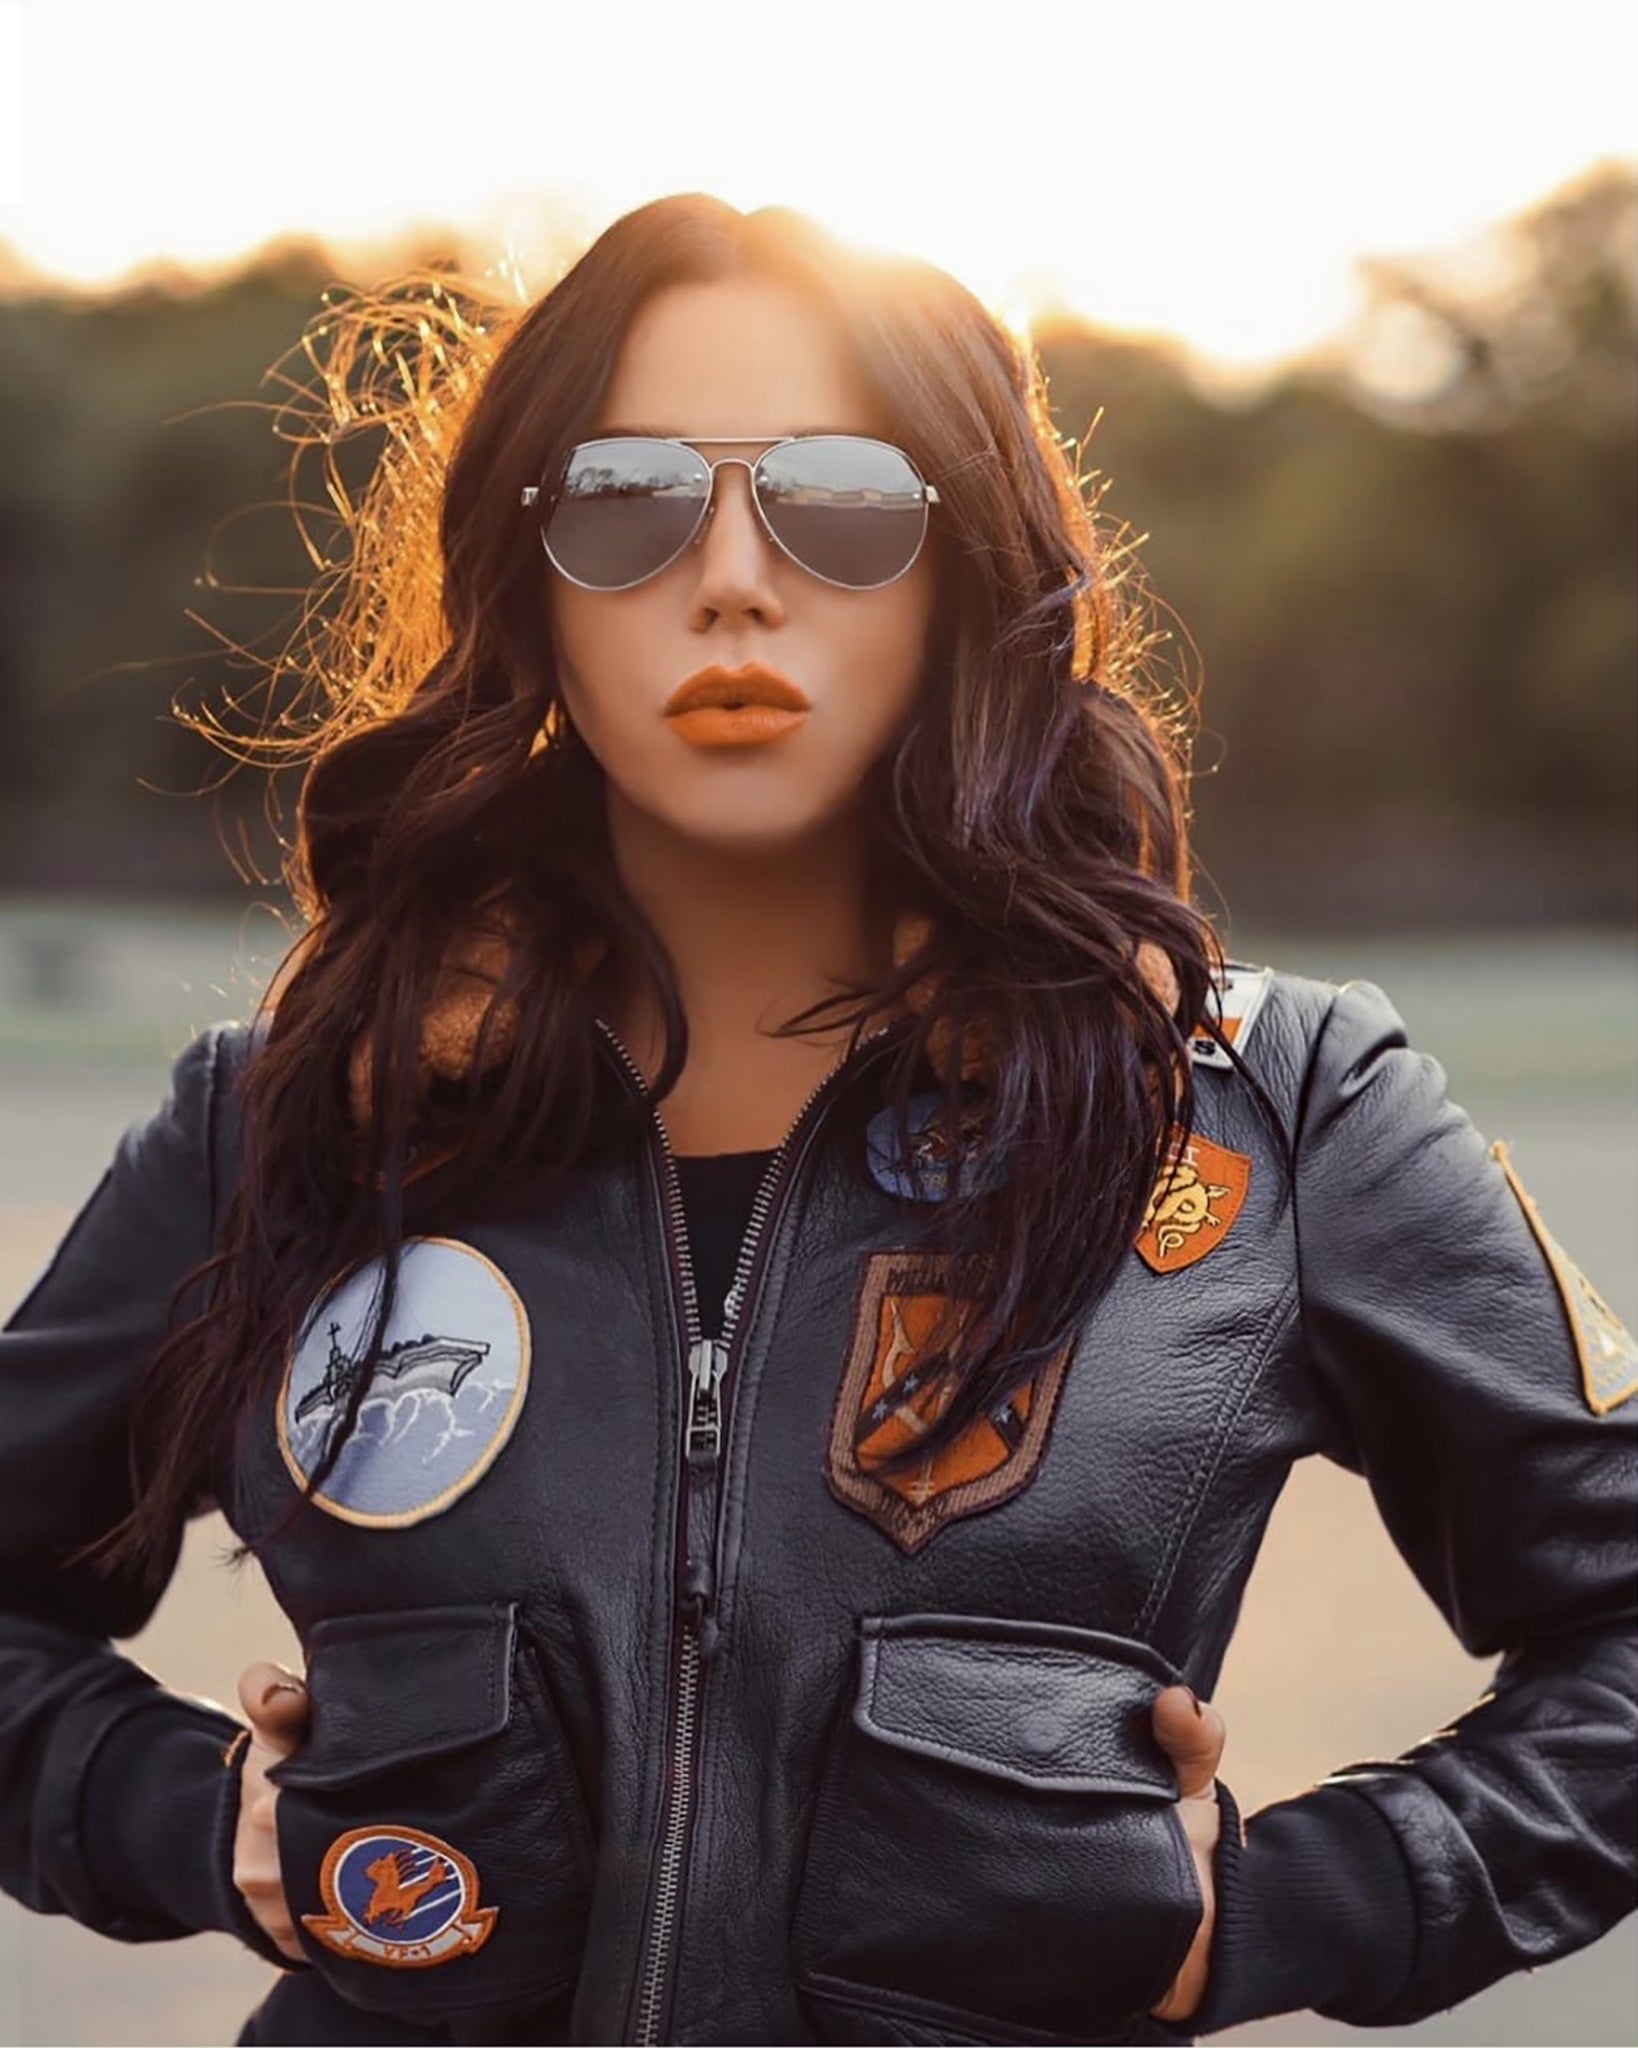  Top Gun® Women's Brown Leather Flight Bomber Jacket from the Official Store